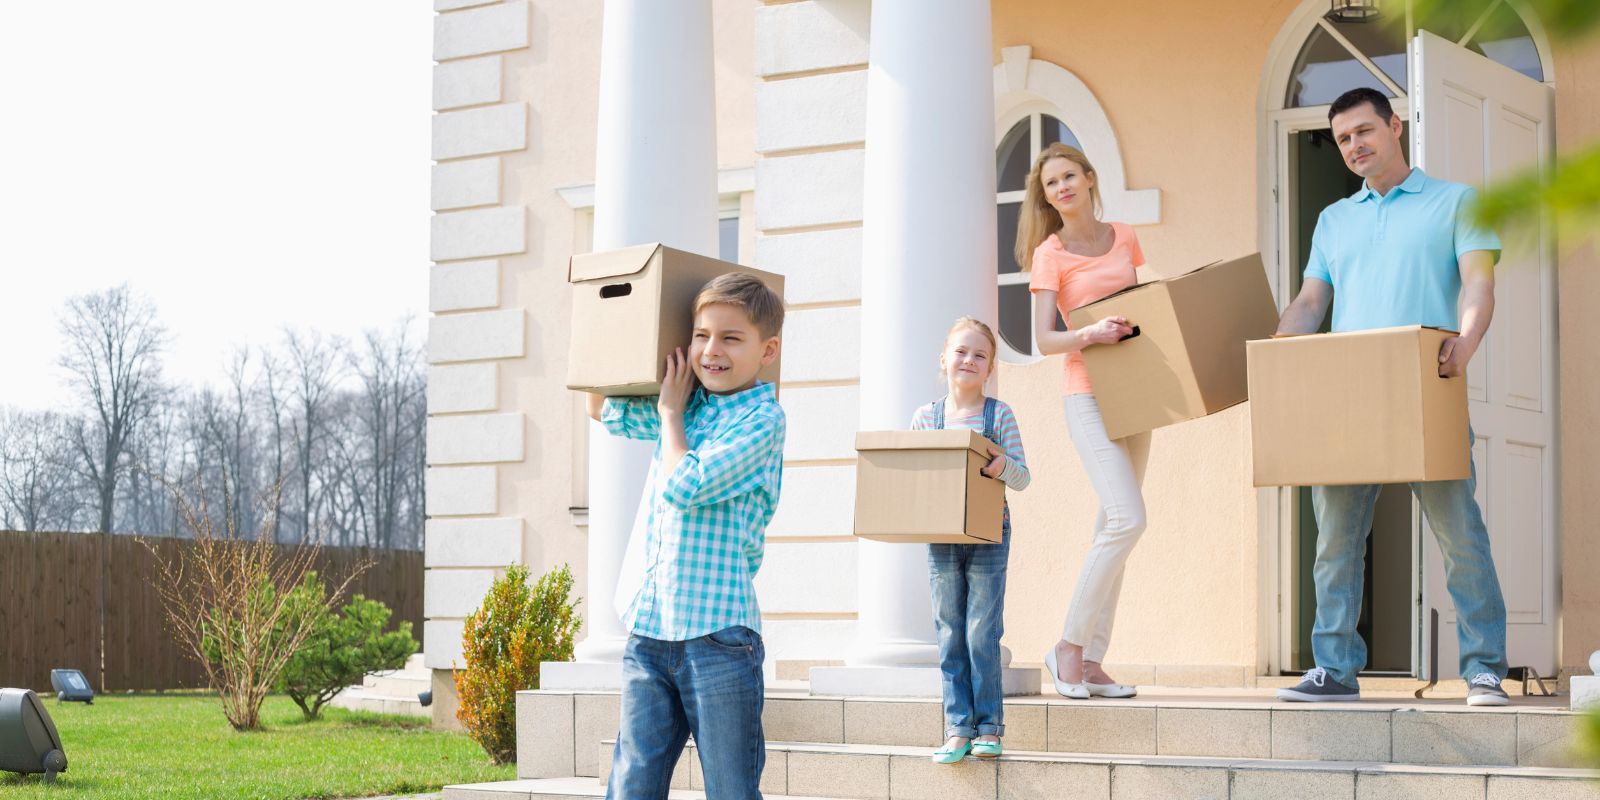 Moving Homes in Fayatteville, NC? Here’s What You Need to Know